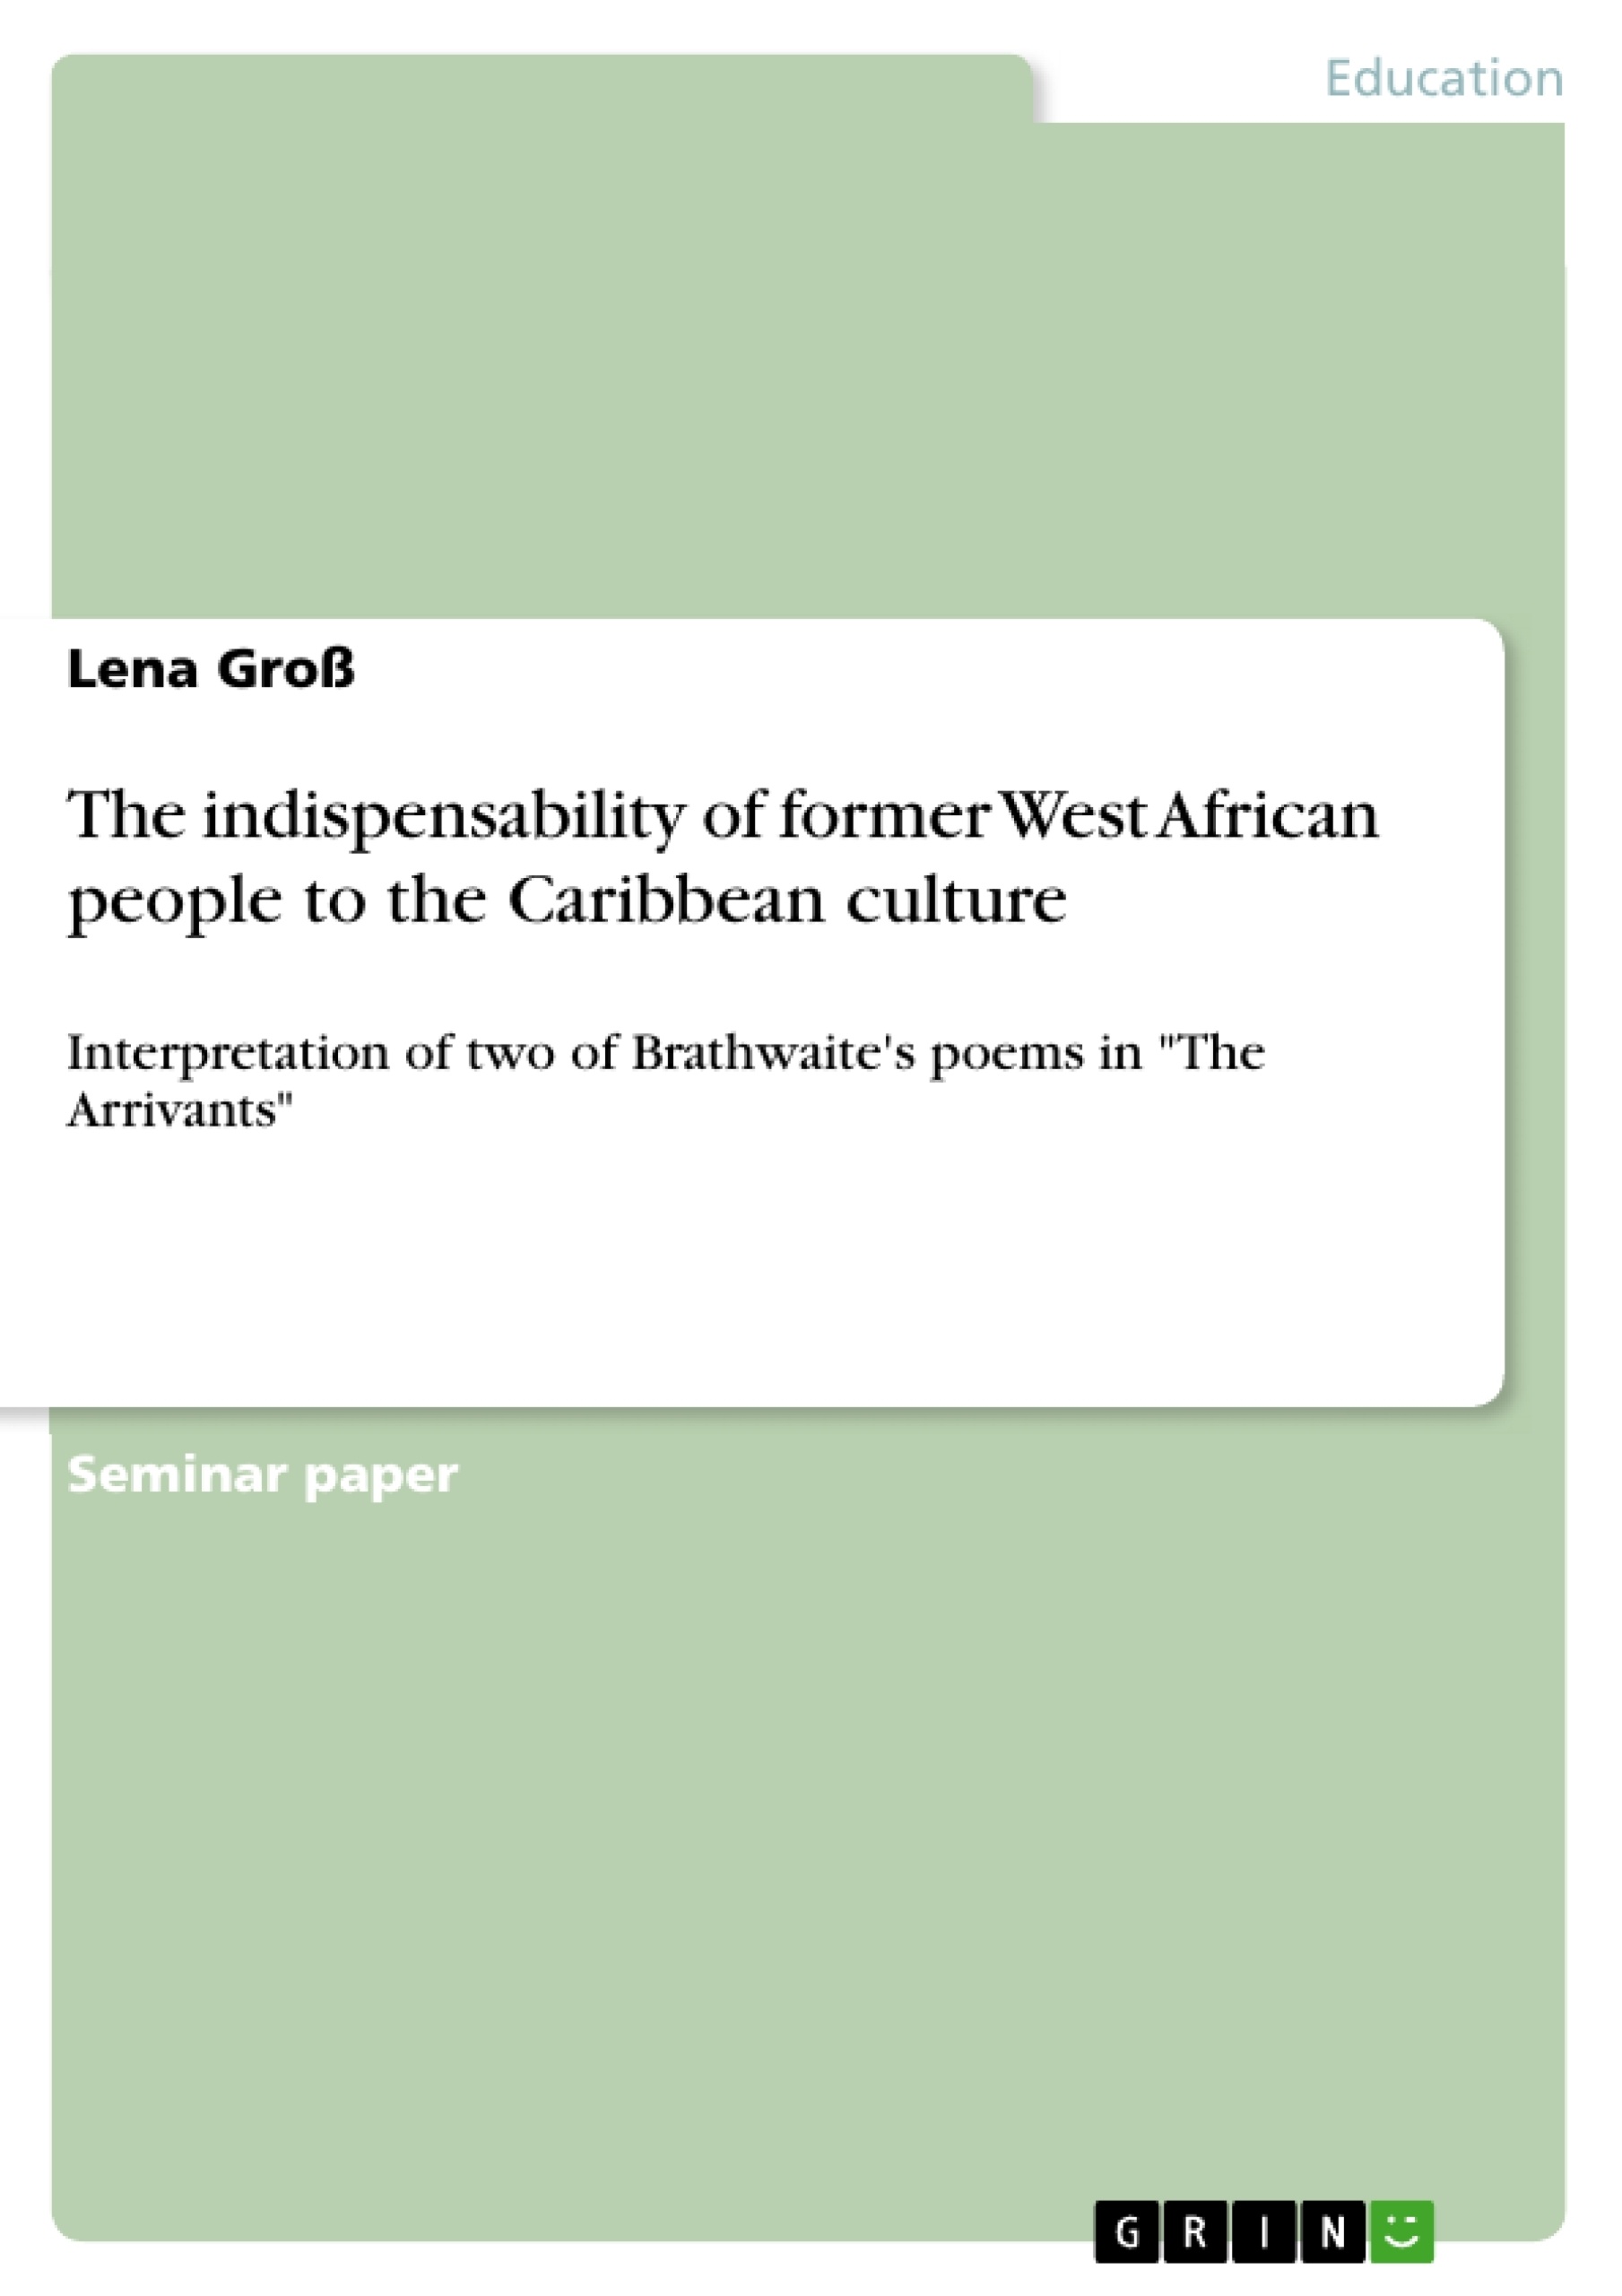 Título: The indispensability of former West African people to the Caribbean culture